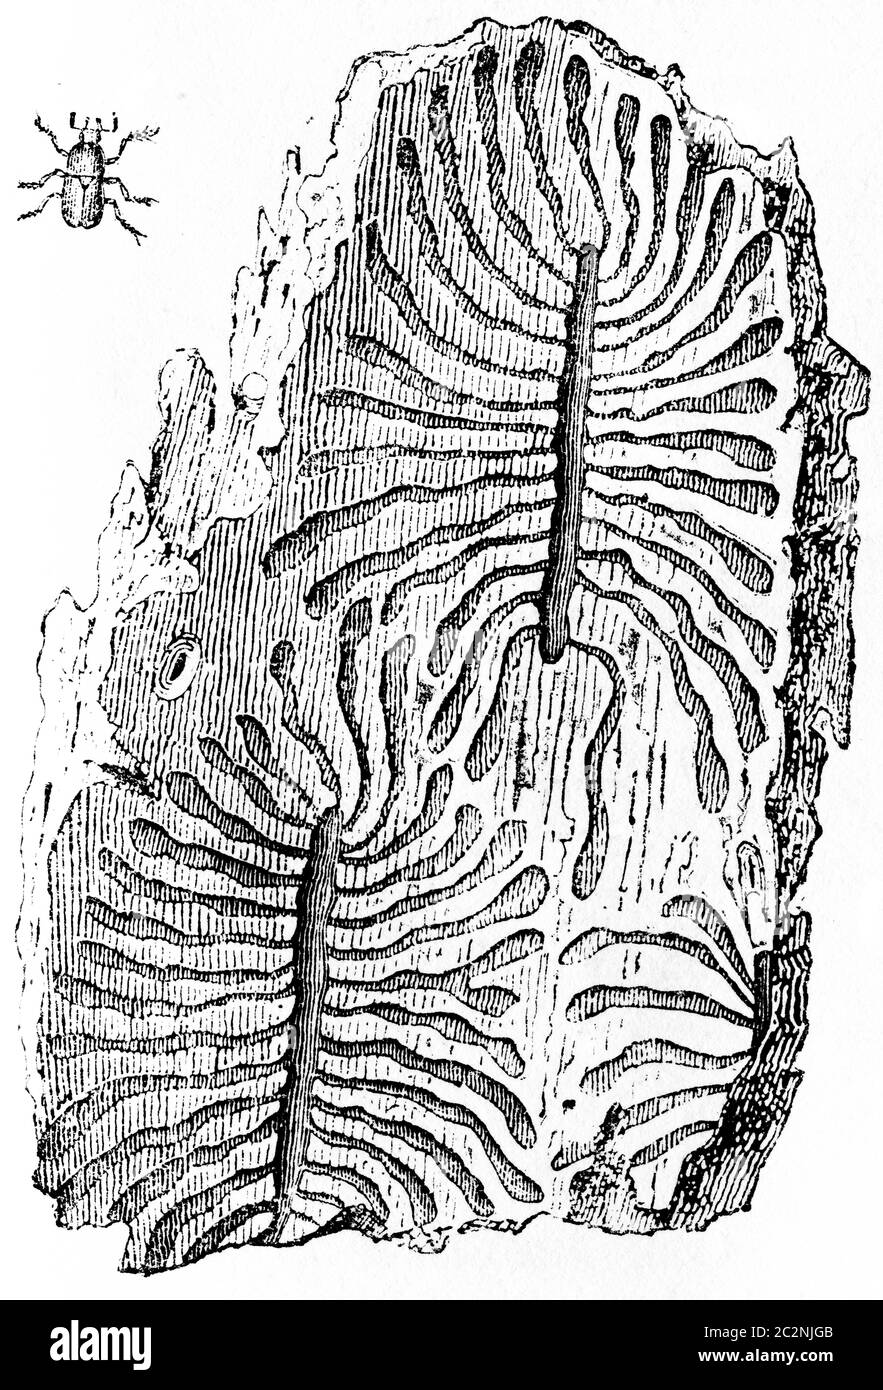 Galleries of bark beetles, vintage engraved illustration. Natural History of Animals, 1880. Stock Photo